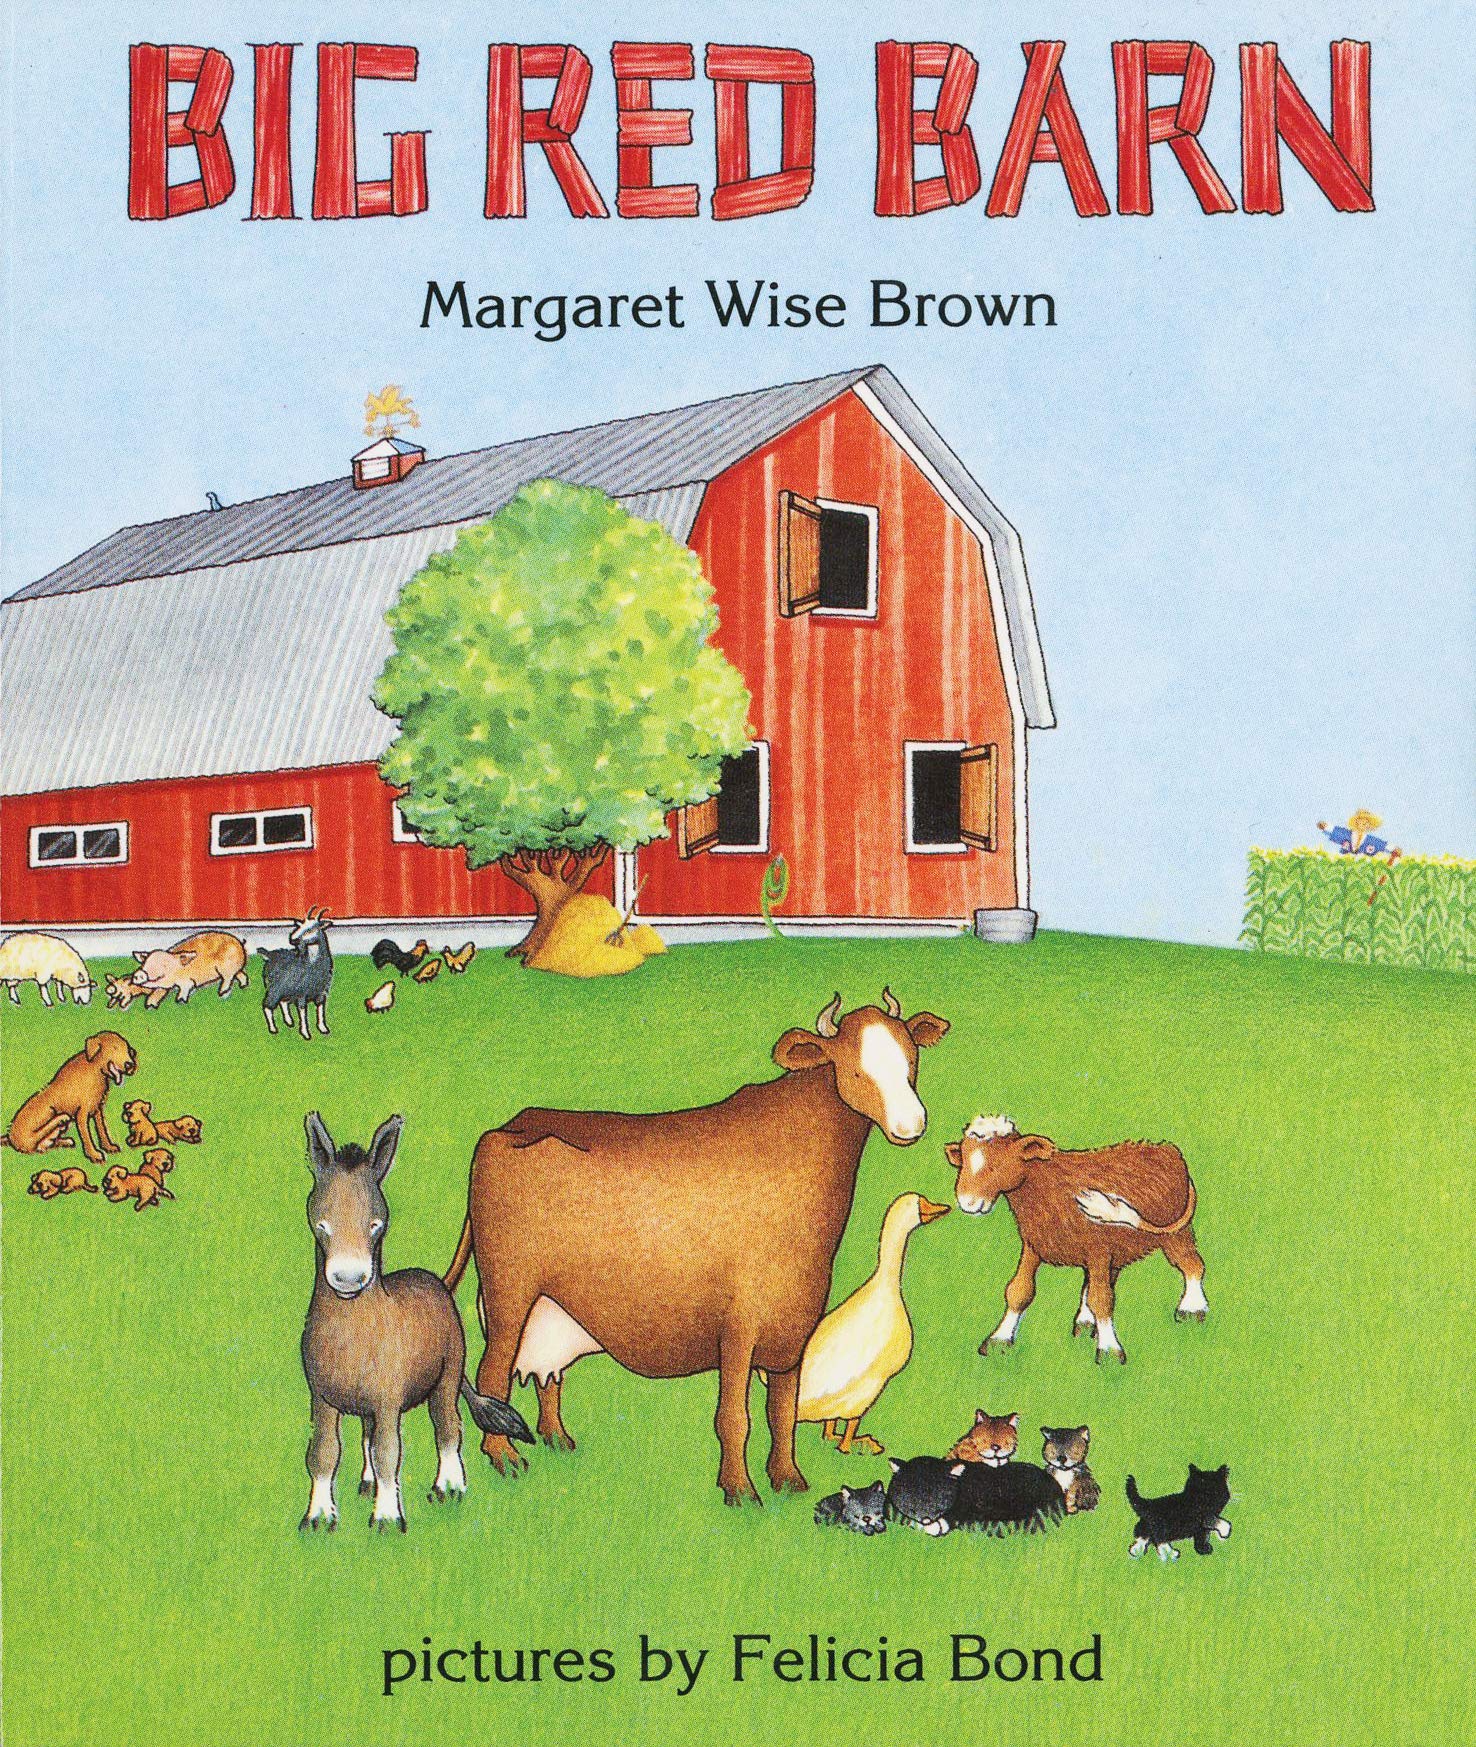 speech and language teaching concepts for Big Red Barn in speech therapy​ ​